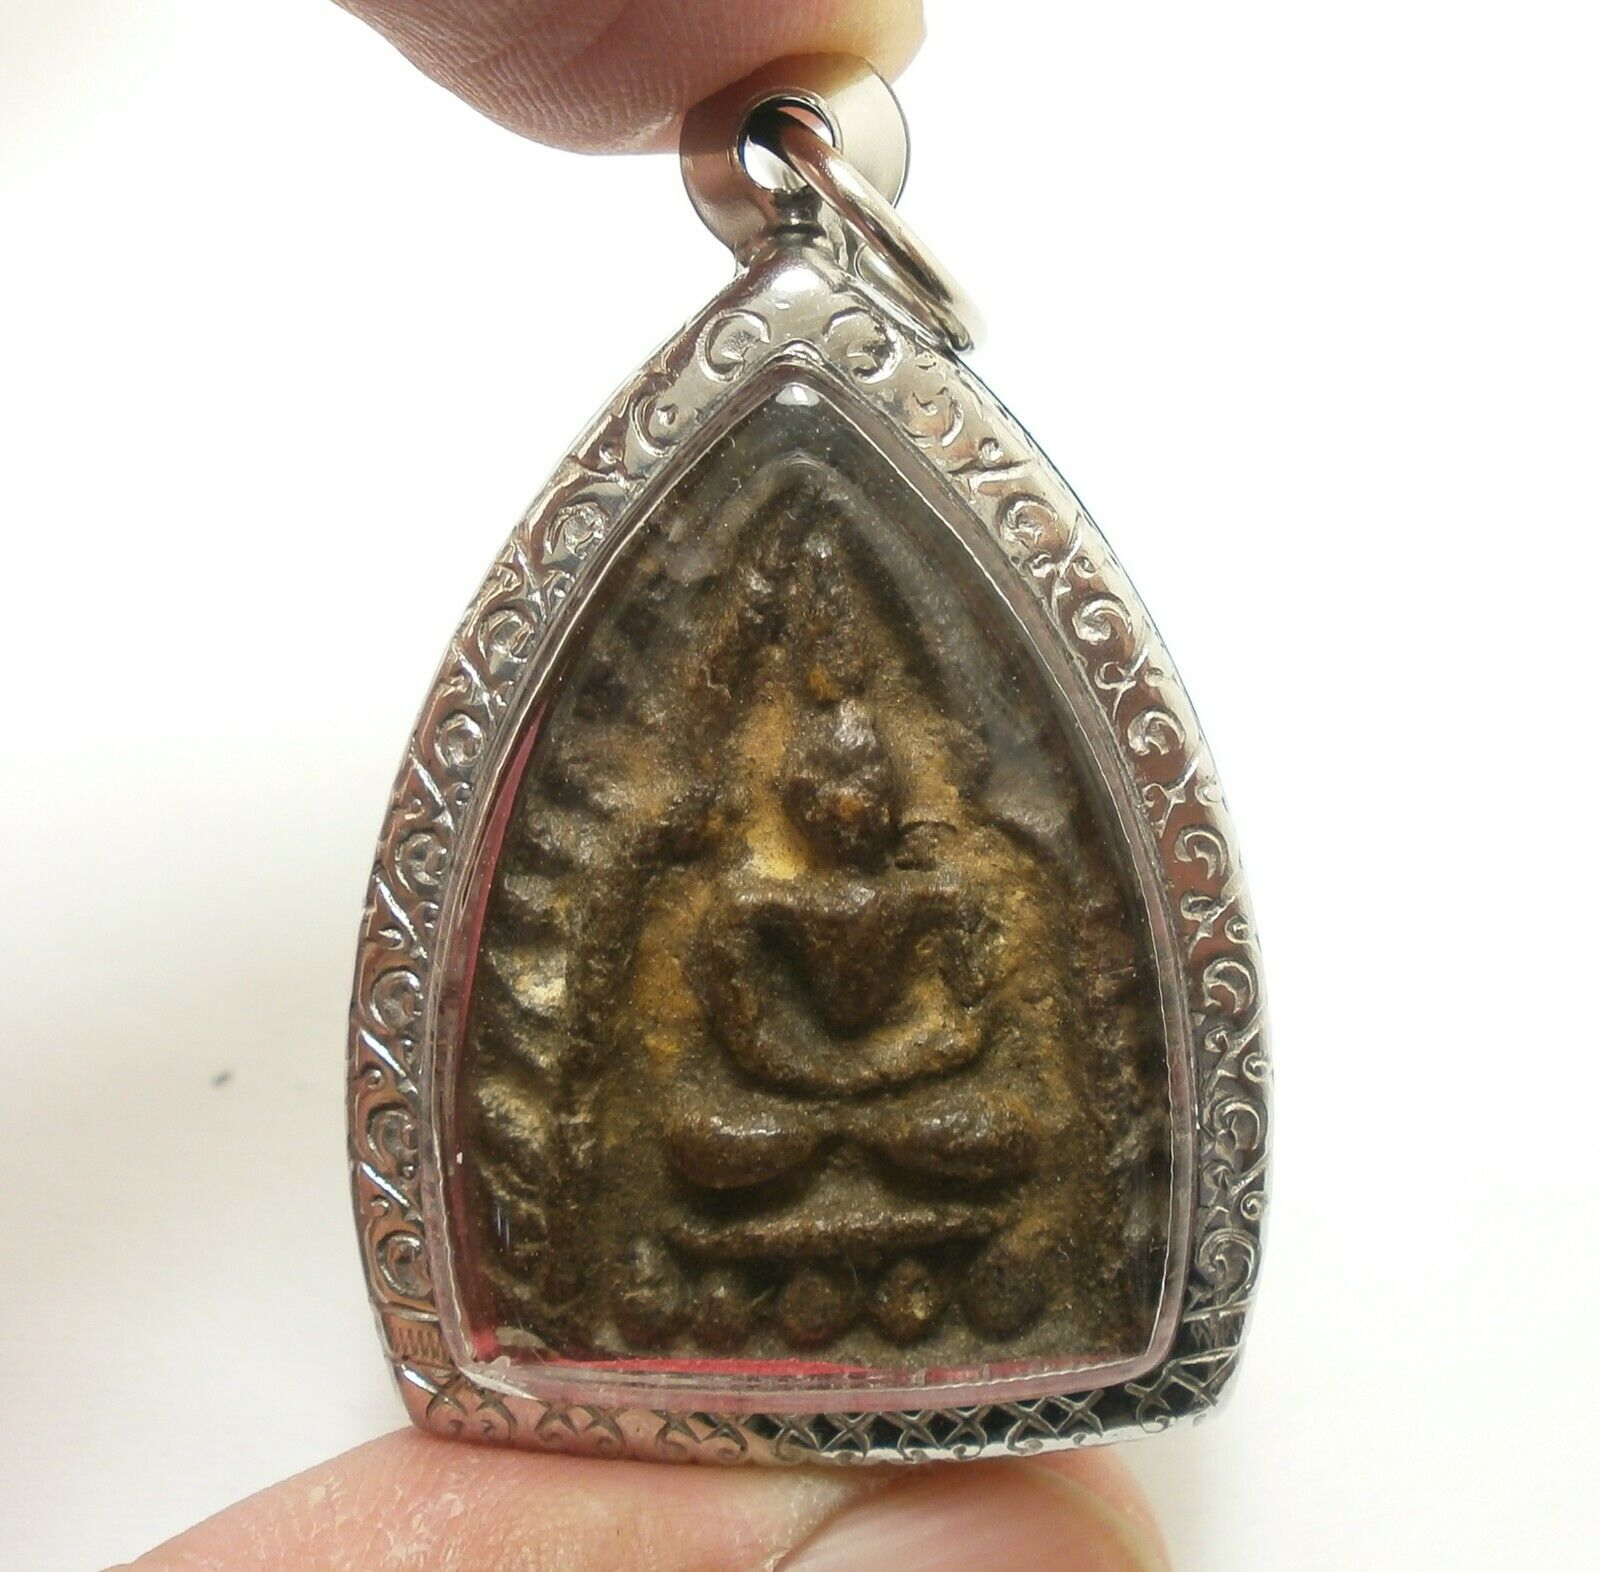 LP BOON BUDDHA IN MAGIC BELL BLESSED 1920s POWERFUL ANTIQUE THAI AMULET PENDANT